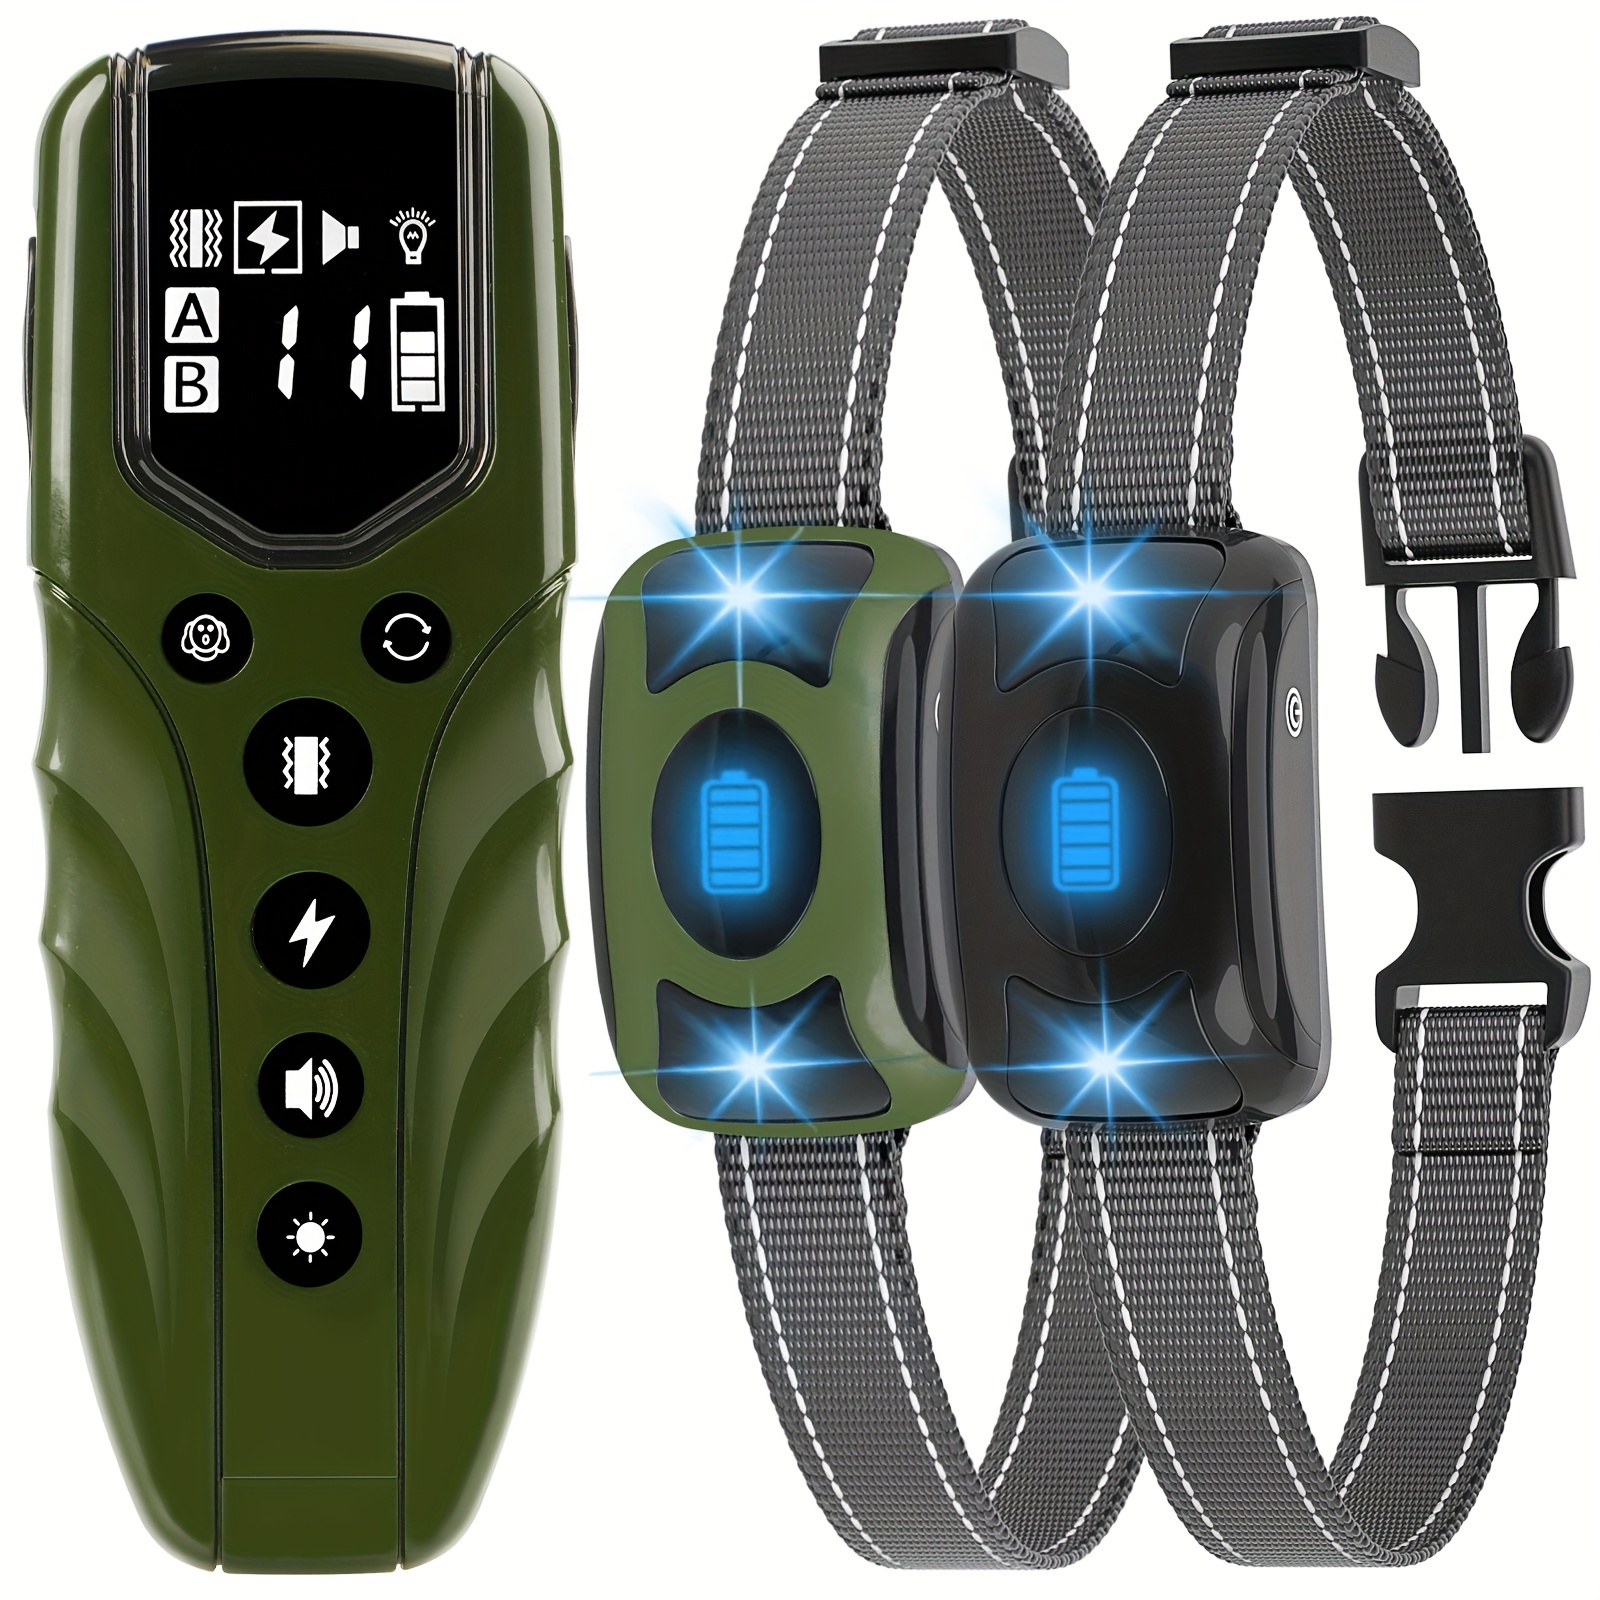 

Dog Shock Collar, Electric Dog Training Collar With Remote 2000ft, Shock Collar For Large Medium Small Dogs, Training Collar For Dogs With Light, Beep, Vibration, Shock And Keypad Lock (20-120 Lbs)